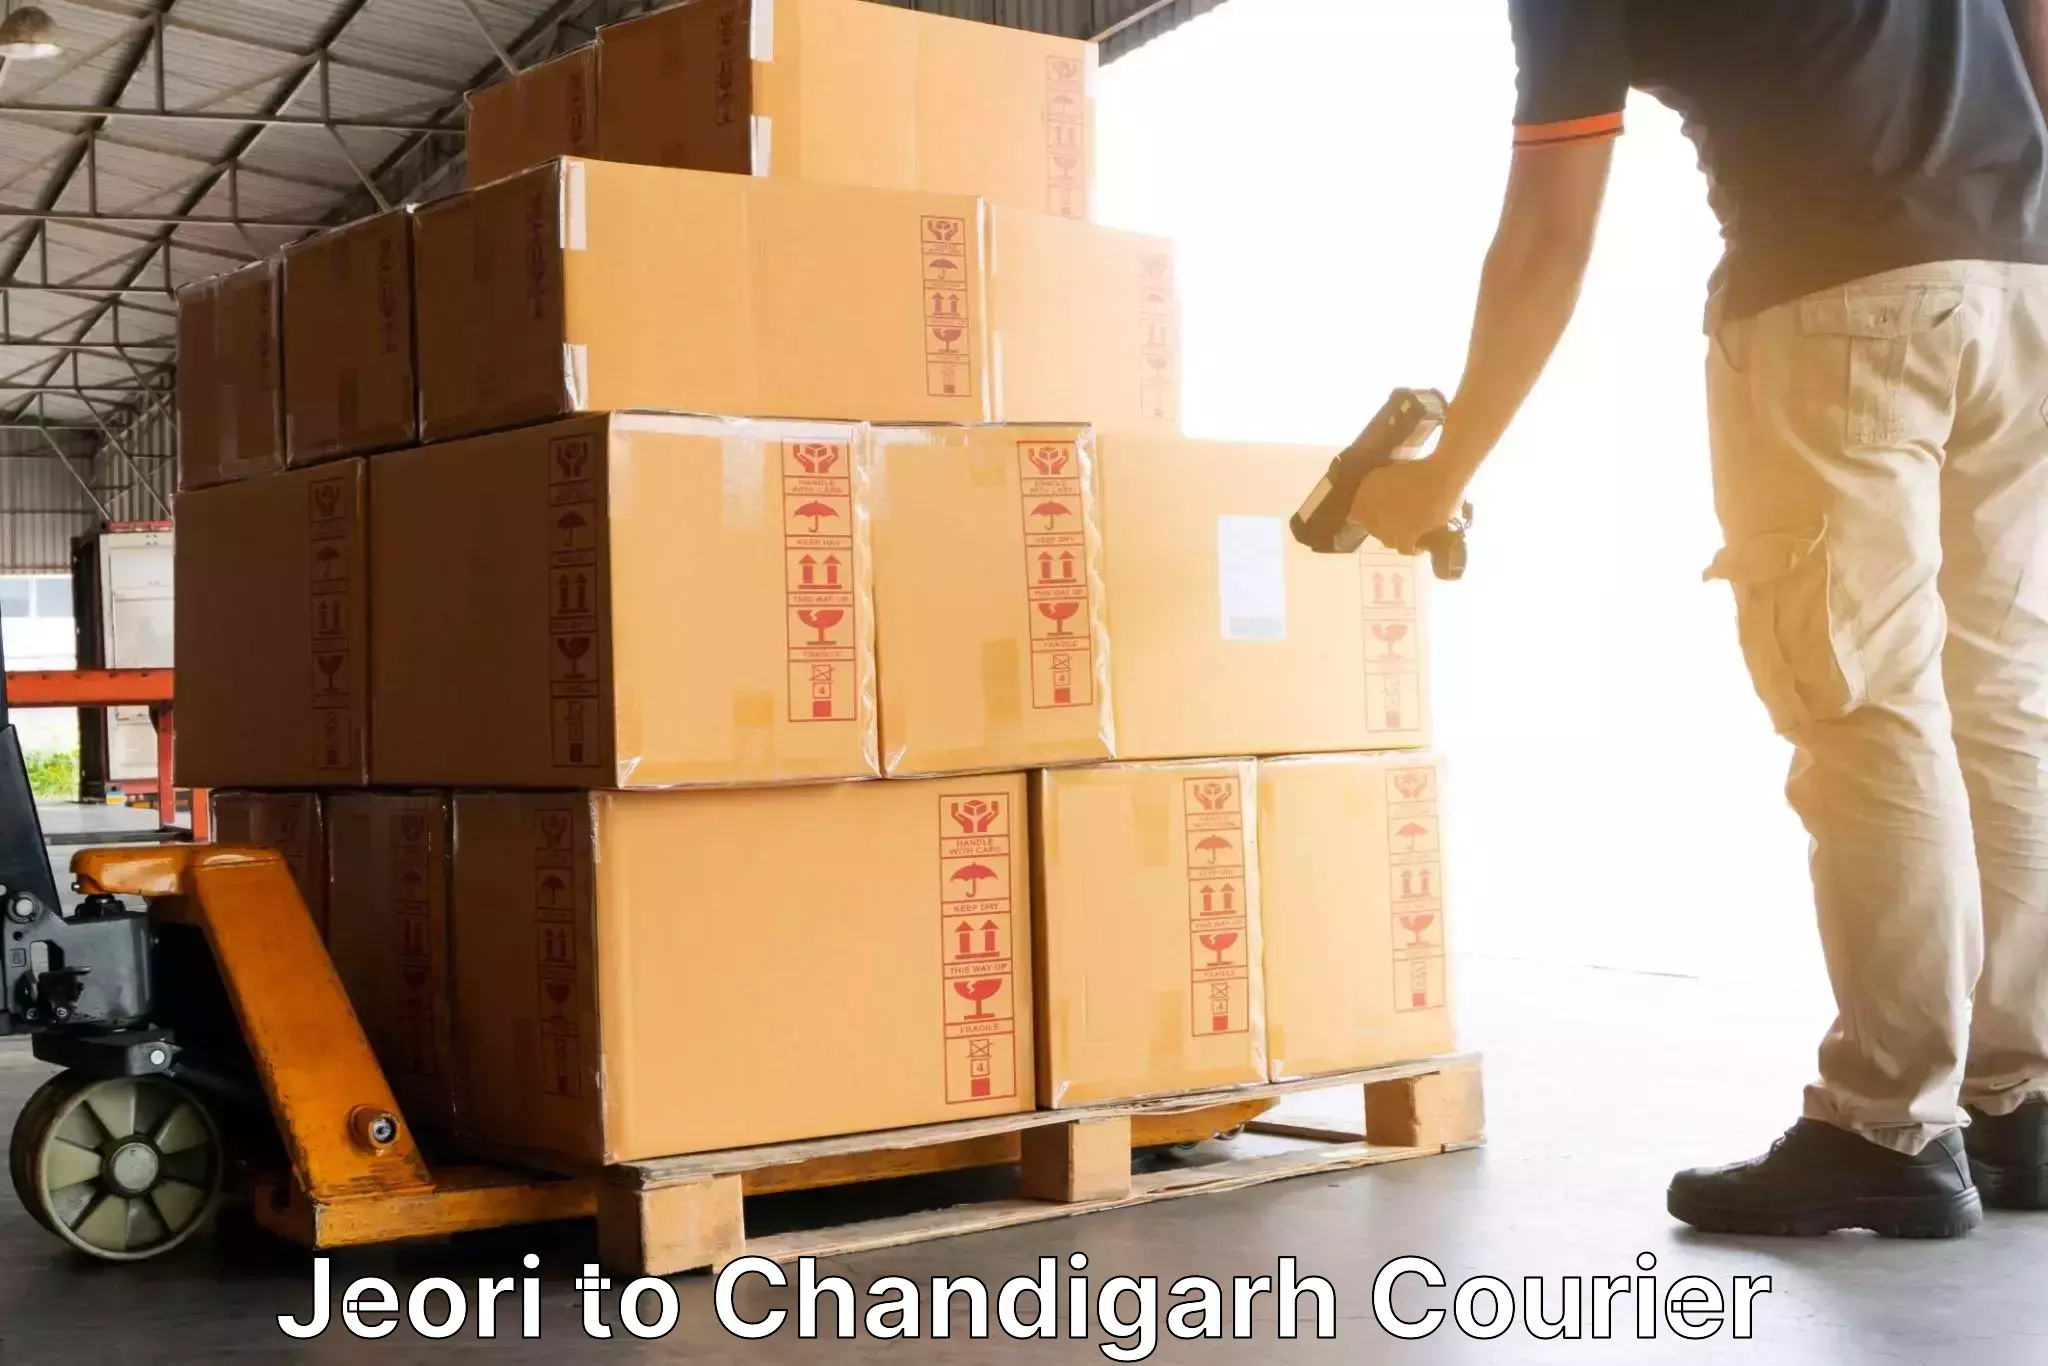 Round-the-clock parcel delivery Jeori to Chandigarh